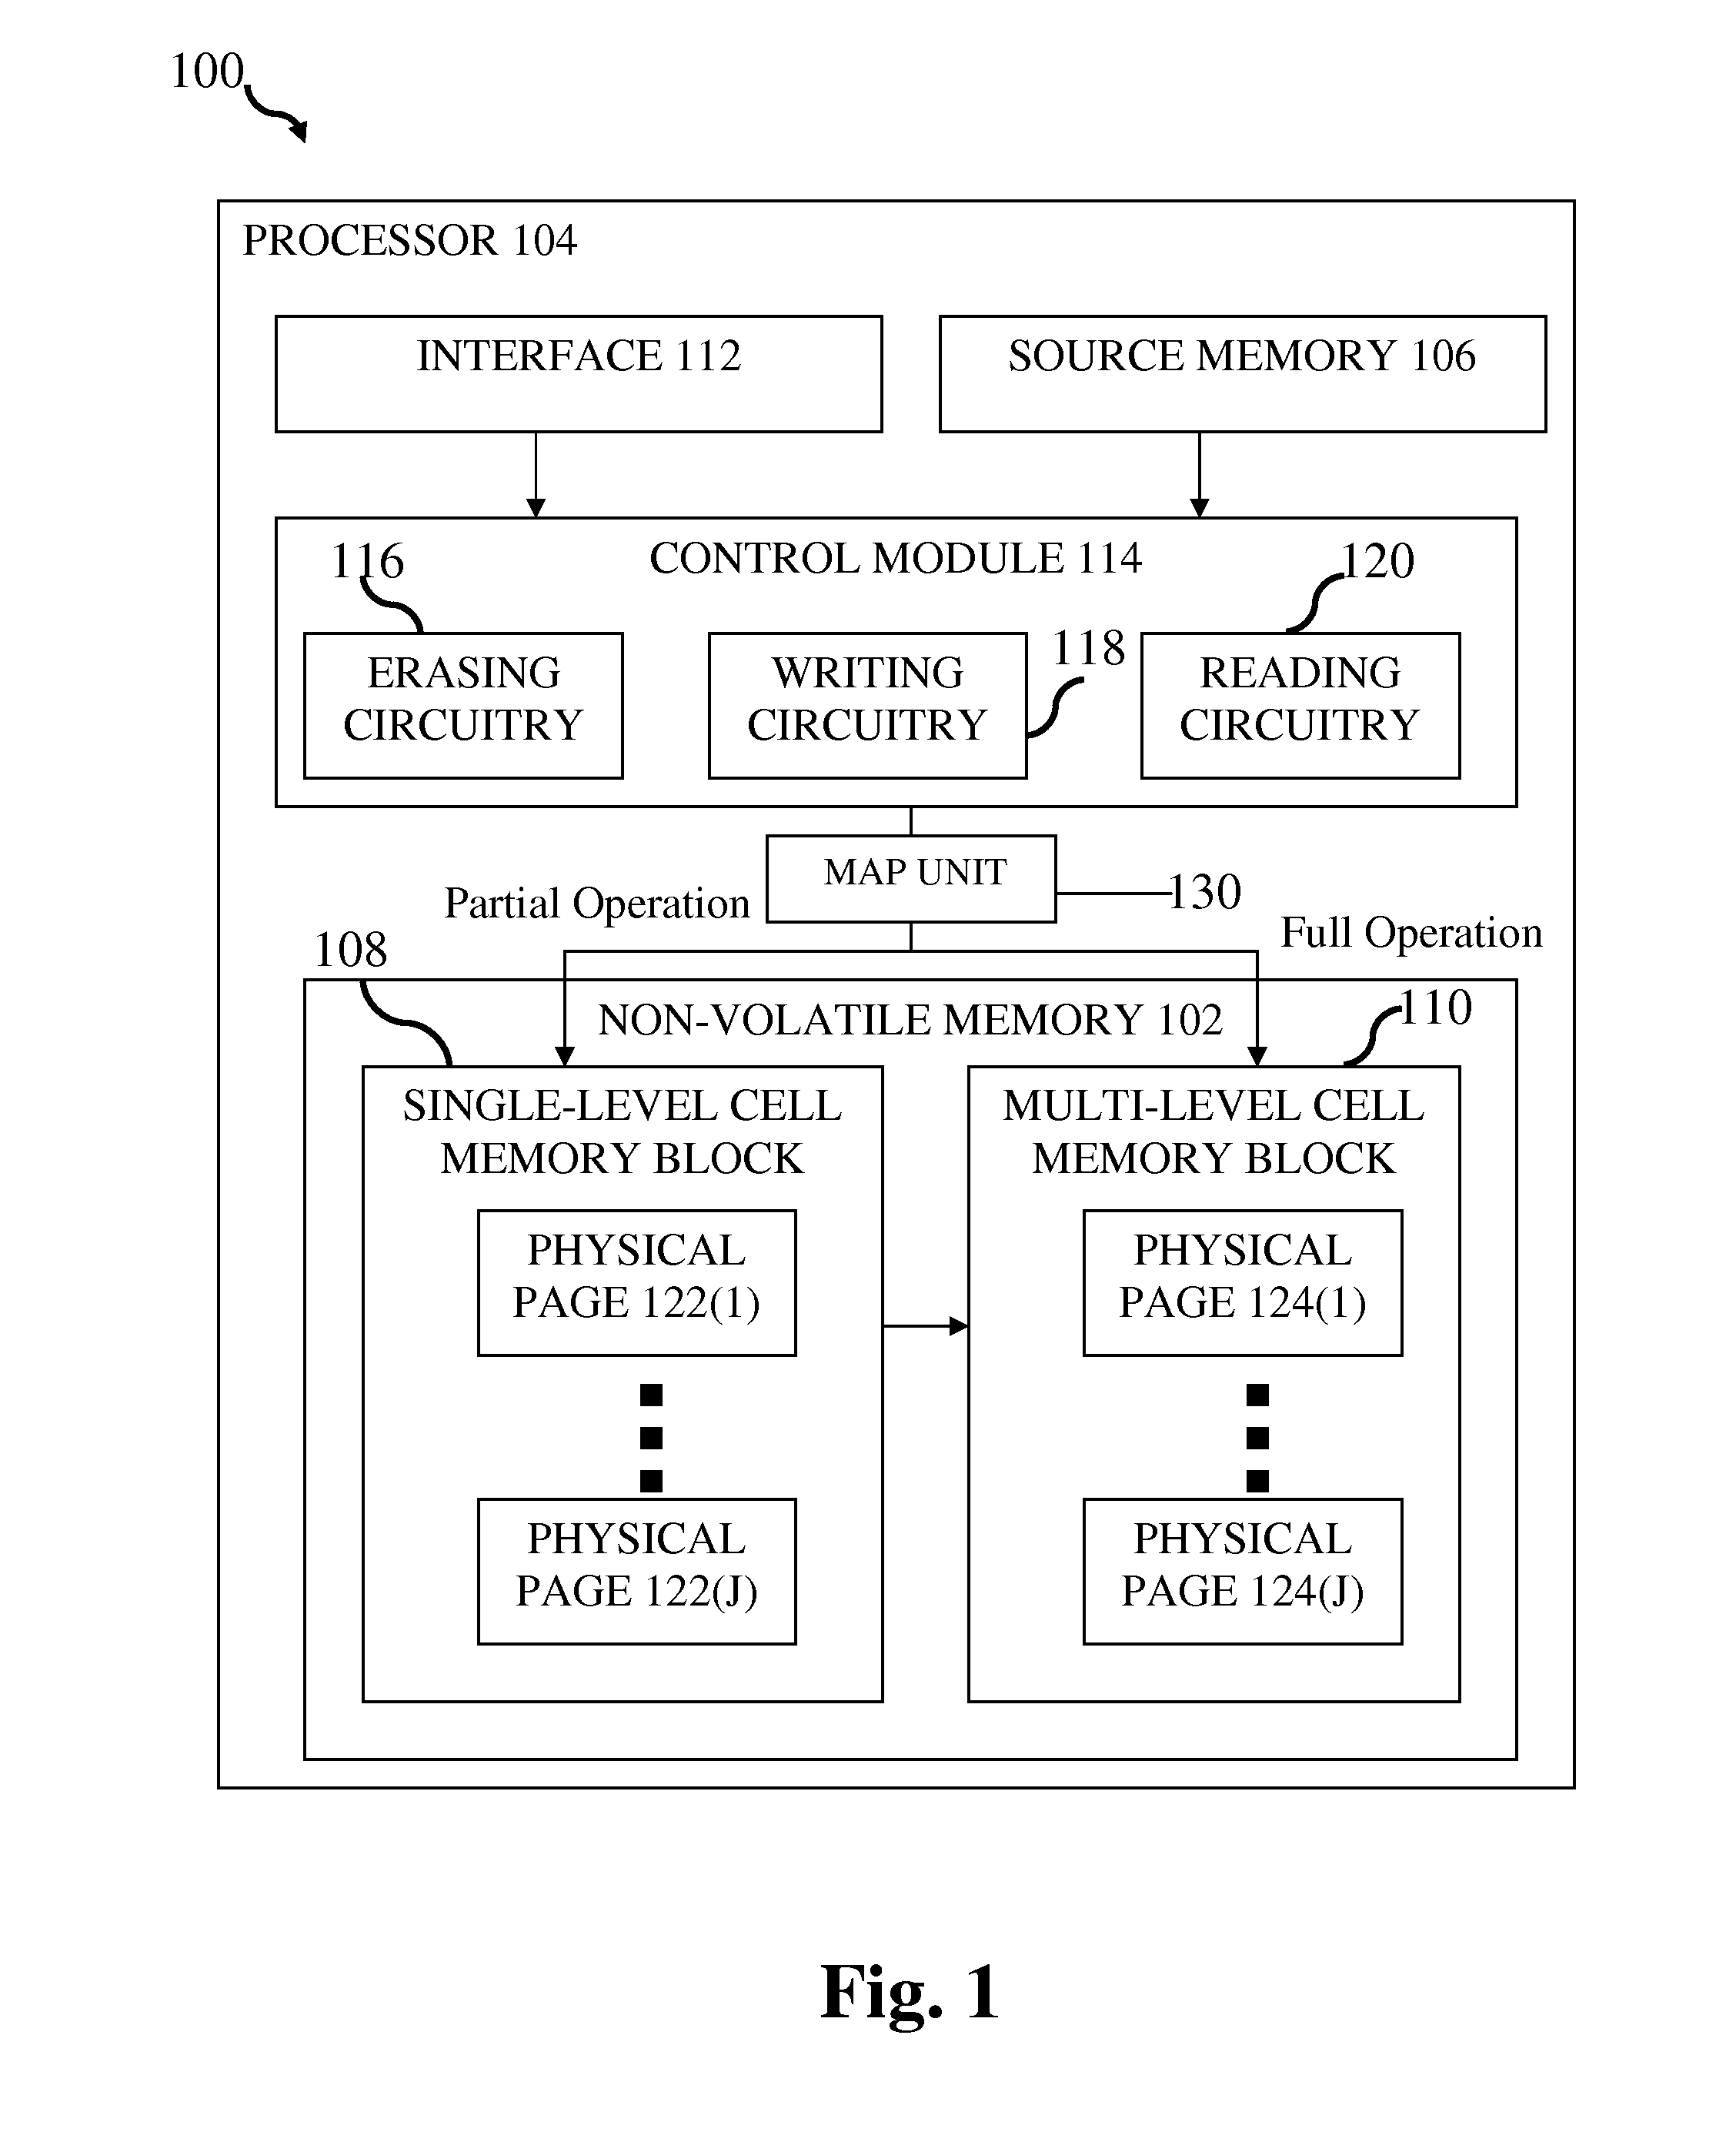 System and method for operating a non-volatile memory including a portion operating as a single-level cell memory and a portion operating as a multi-level cell memory